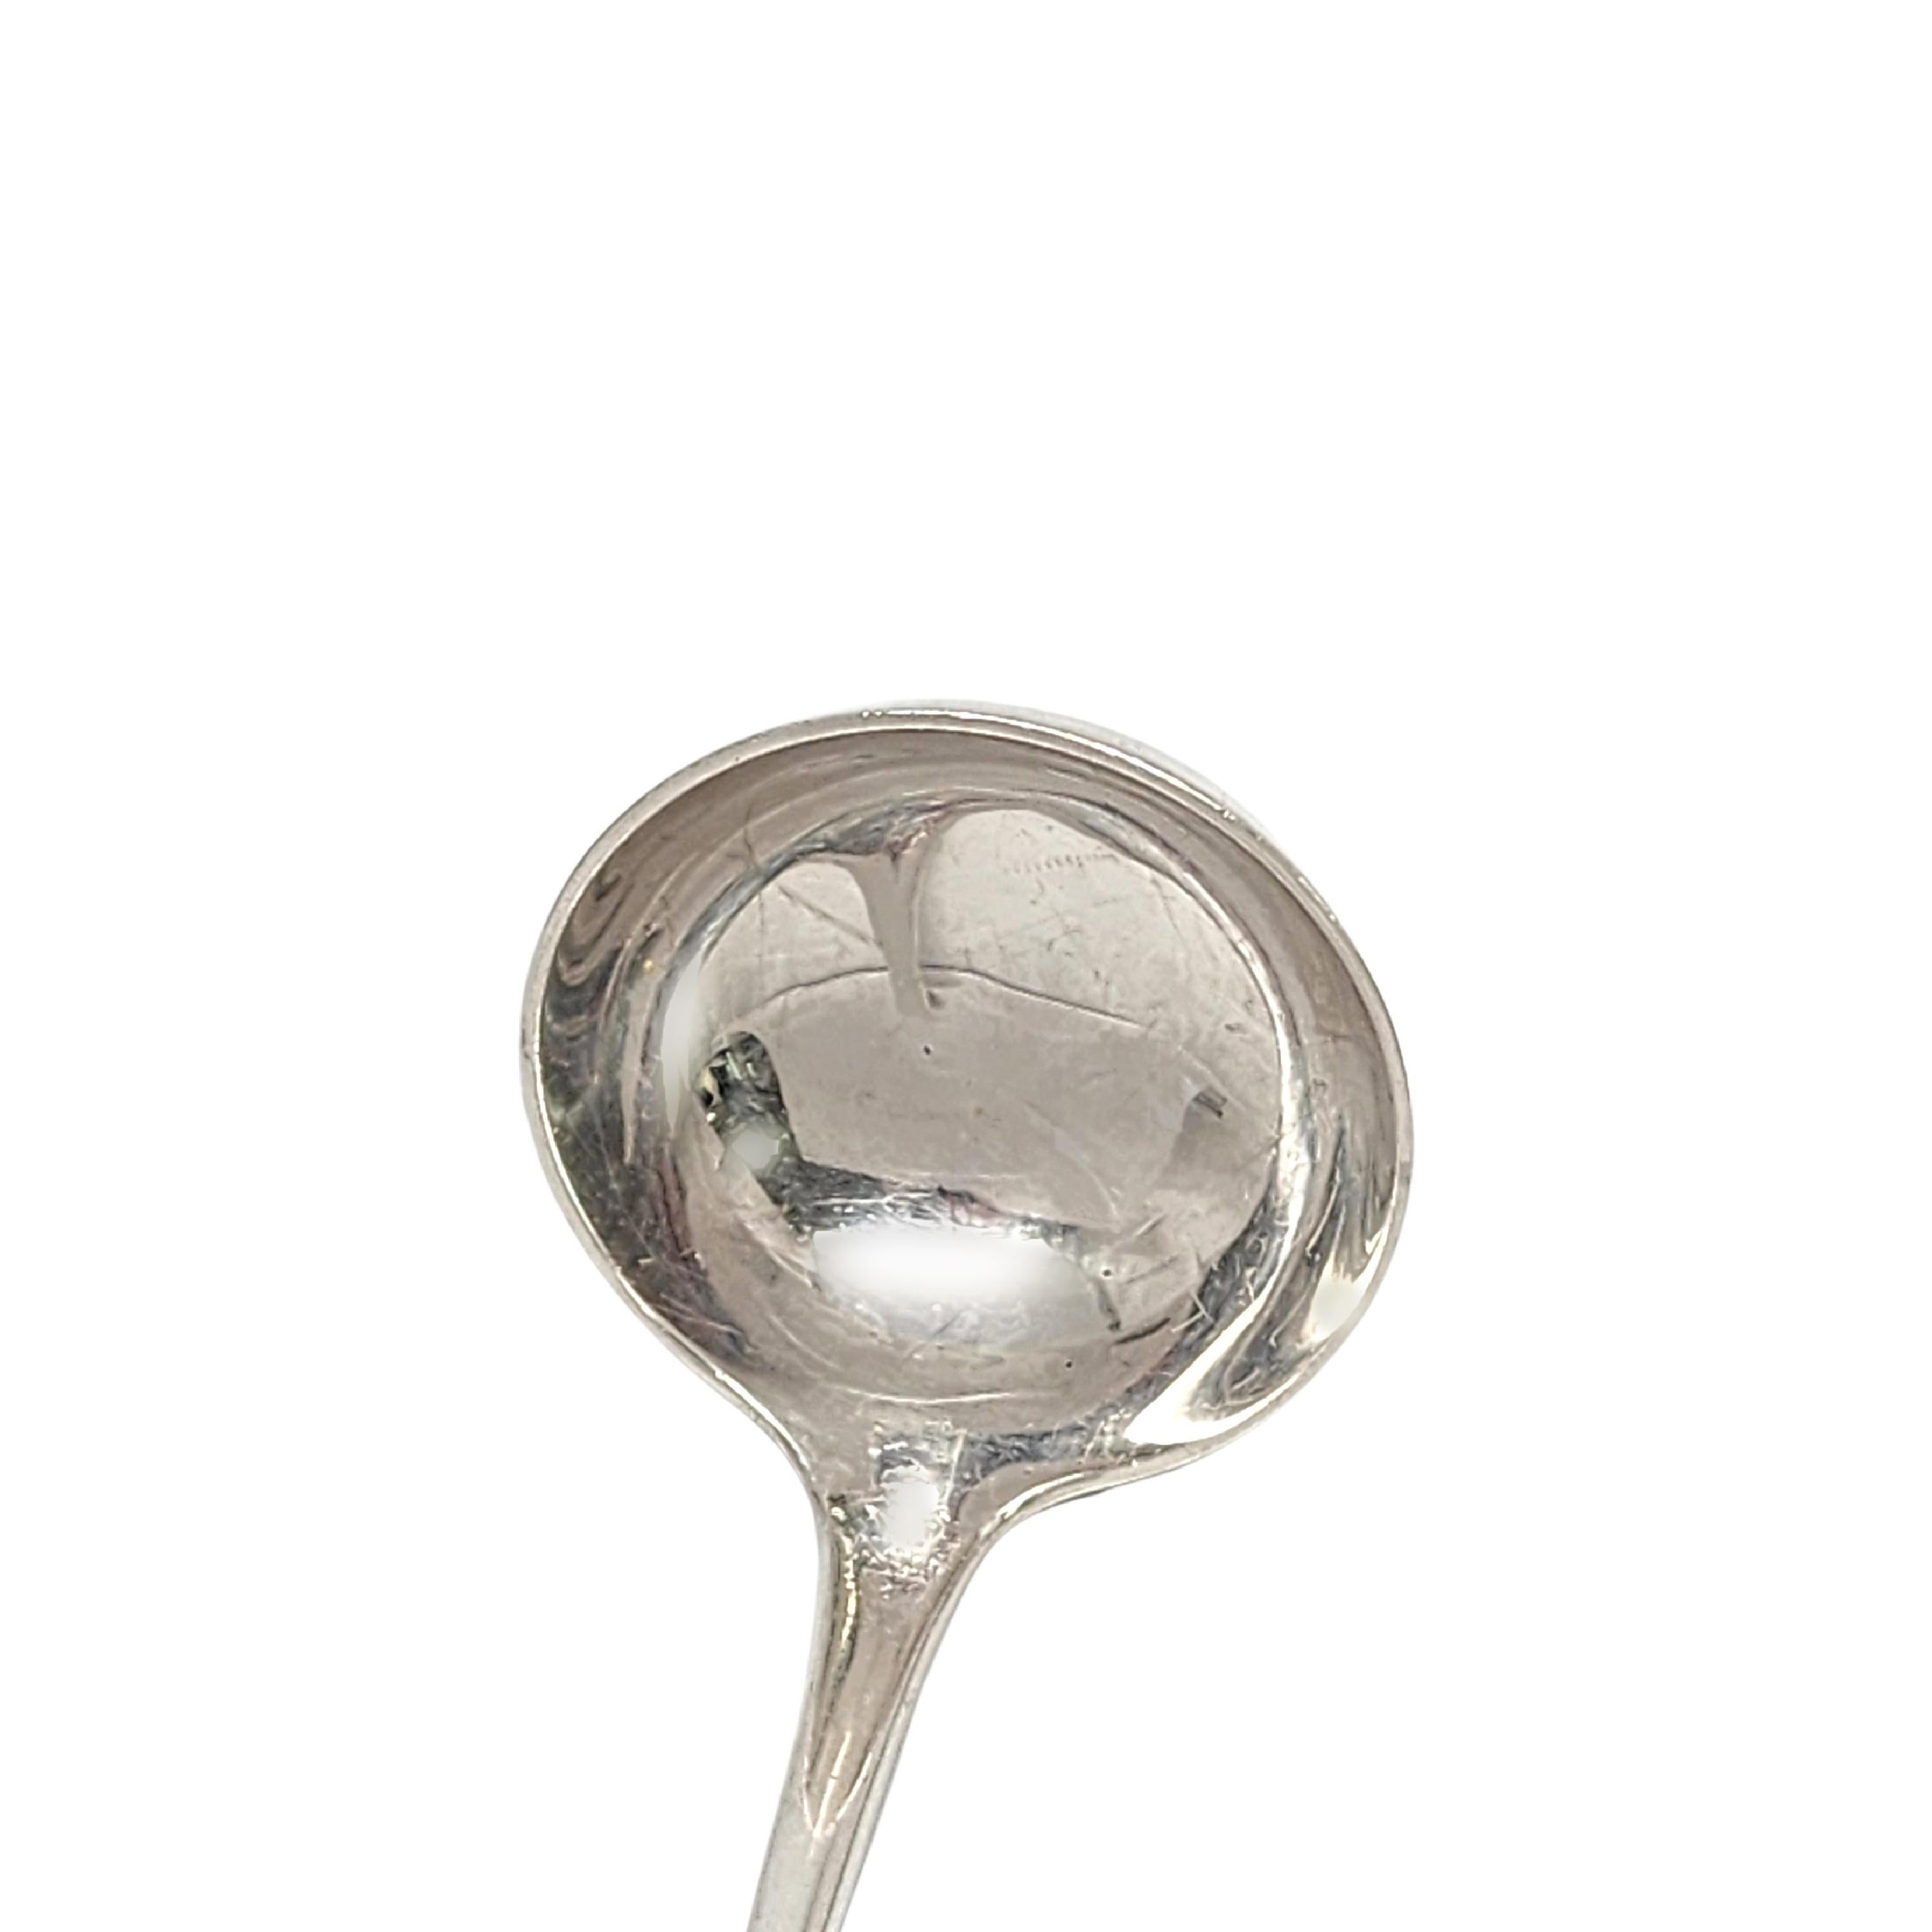 Tiffany & Co Sterling Silver Reproduction Edinborough Ladle with Monogram 'C' For Sale 7